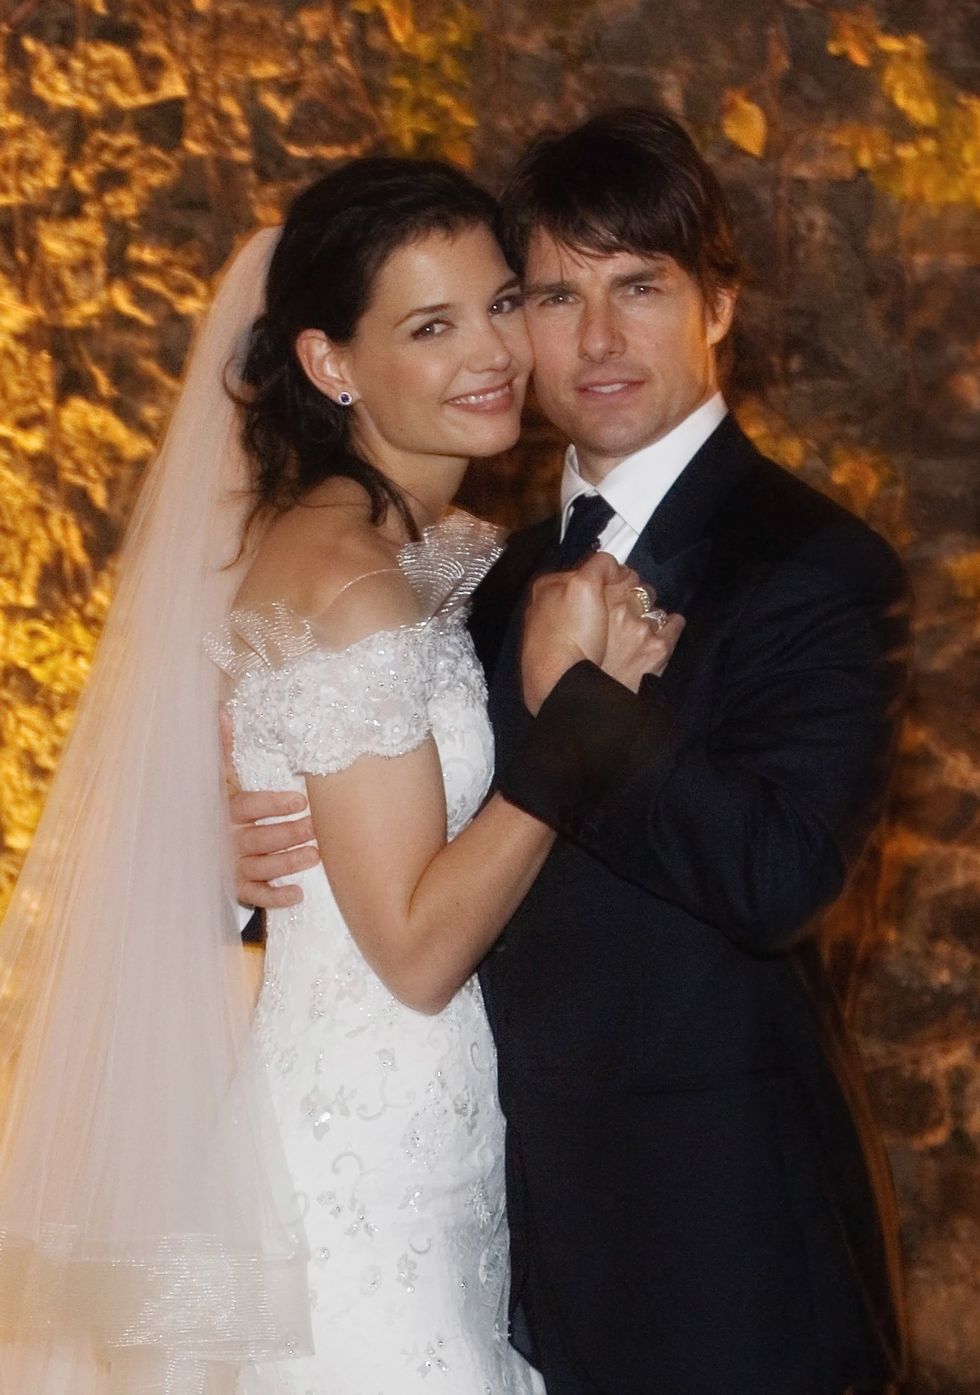 bracciano, italy november 18 in this handout photo provided by robert evans, tom cruise and katie holmes pose together at castello odescalchi on their wedding day november 18, 2006 in bracciano, near rome, italy photo by robert evanshandout via getty images